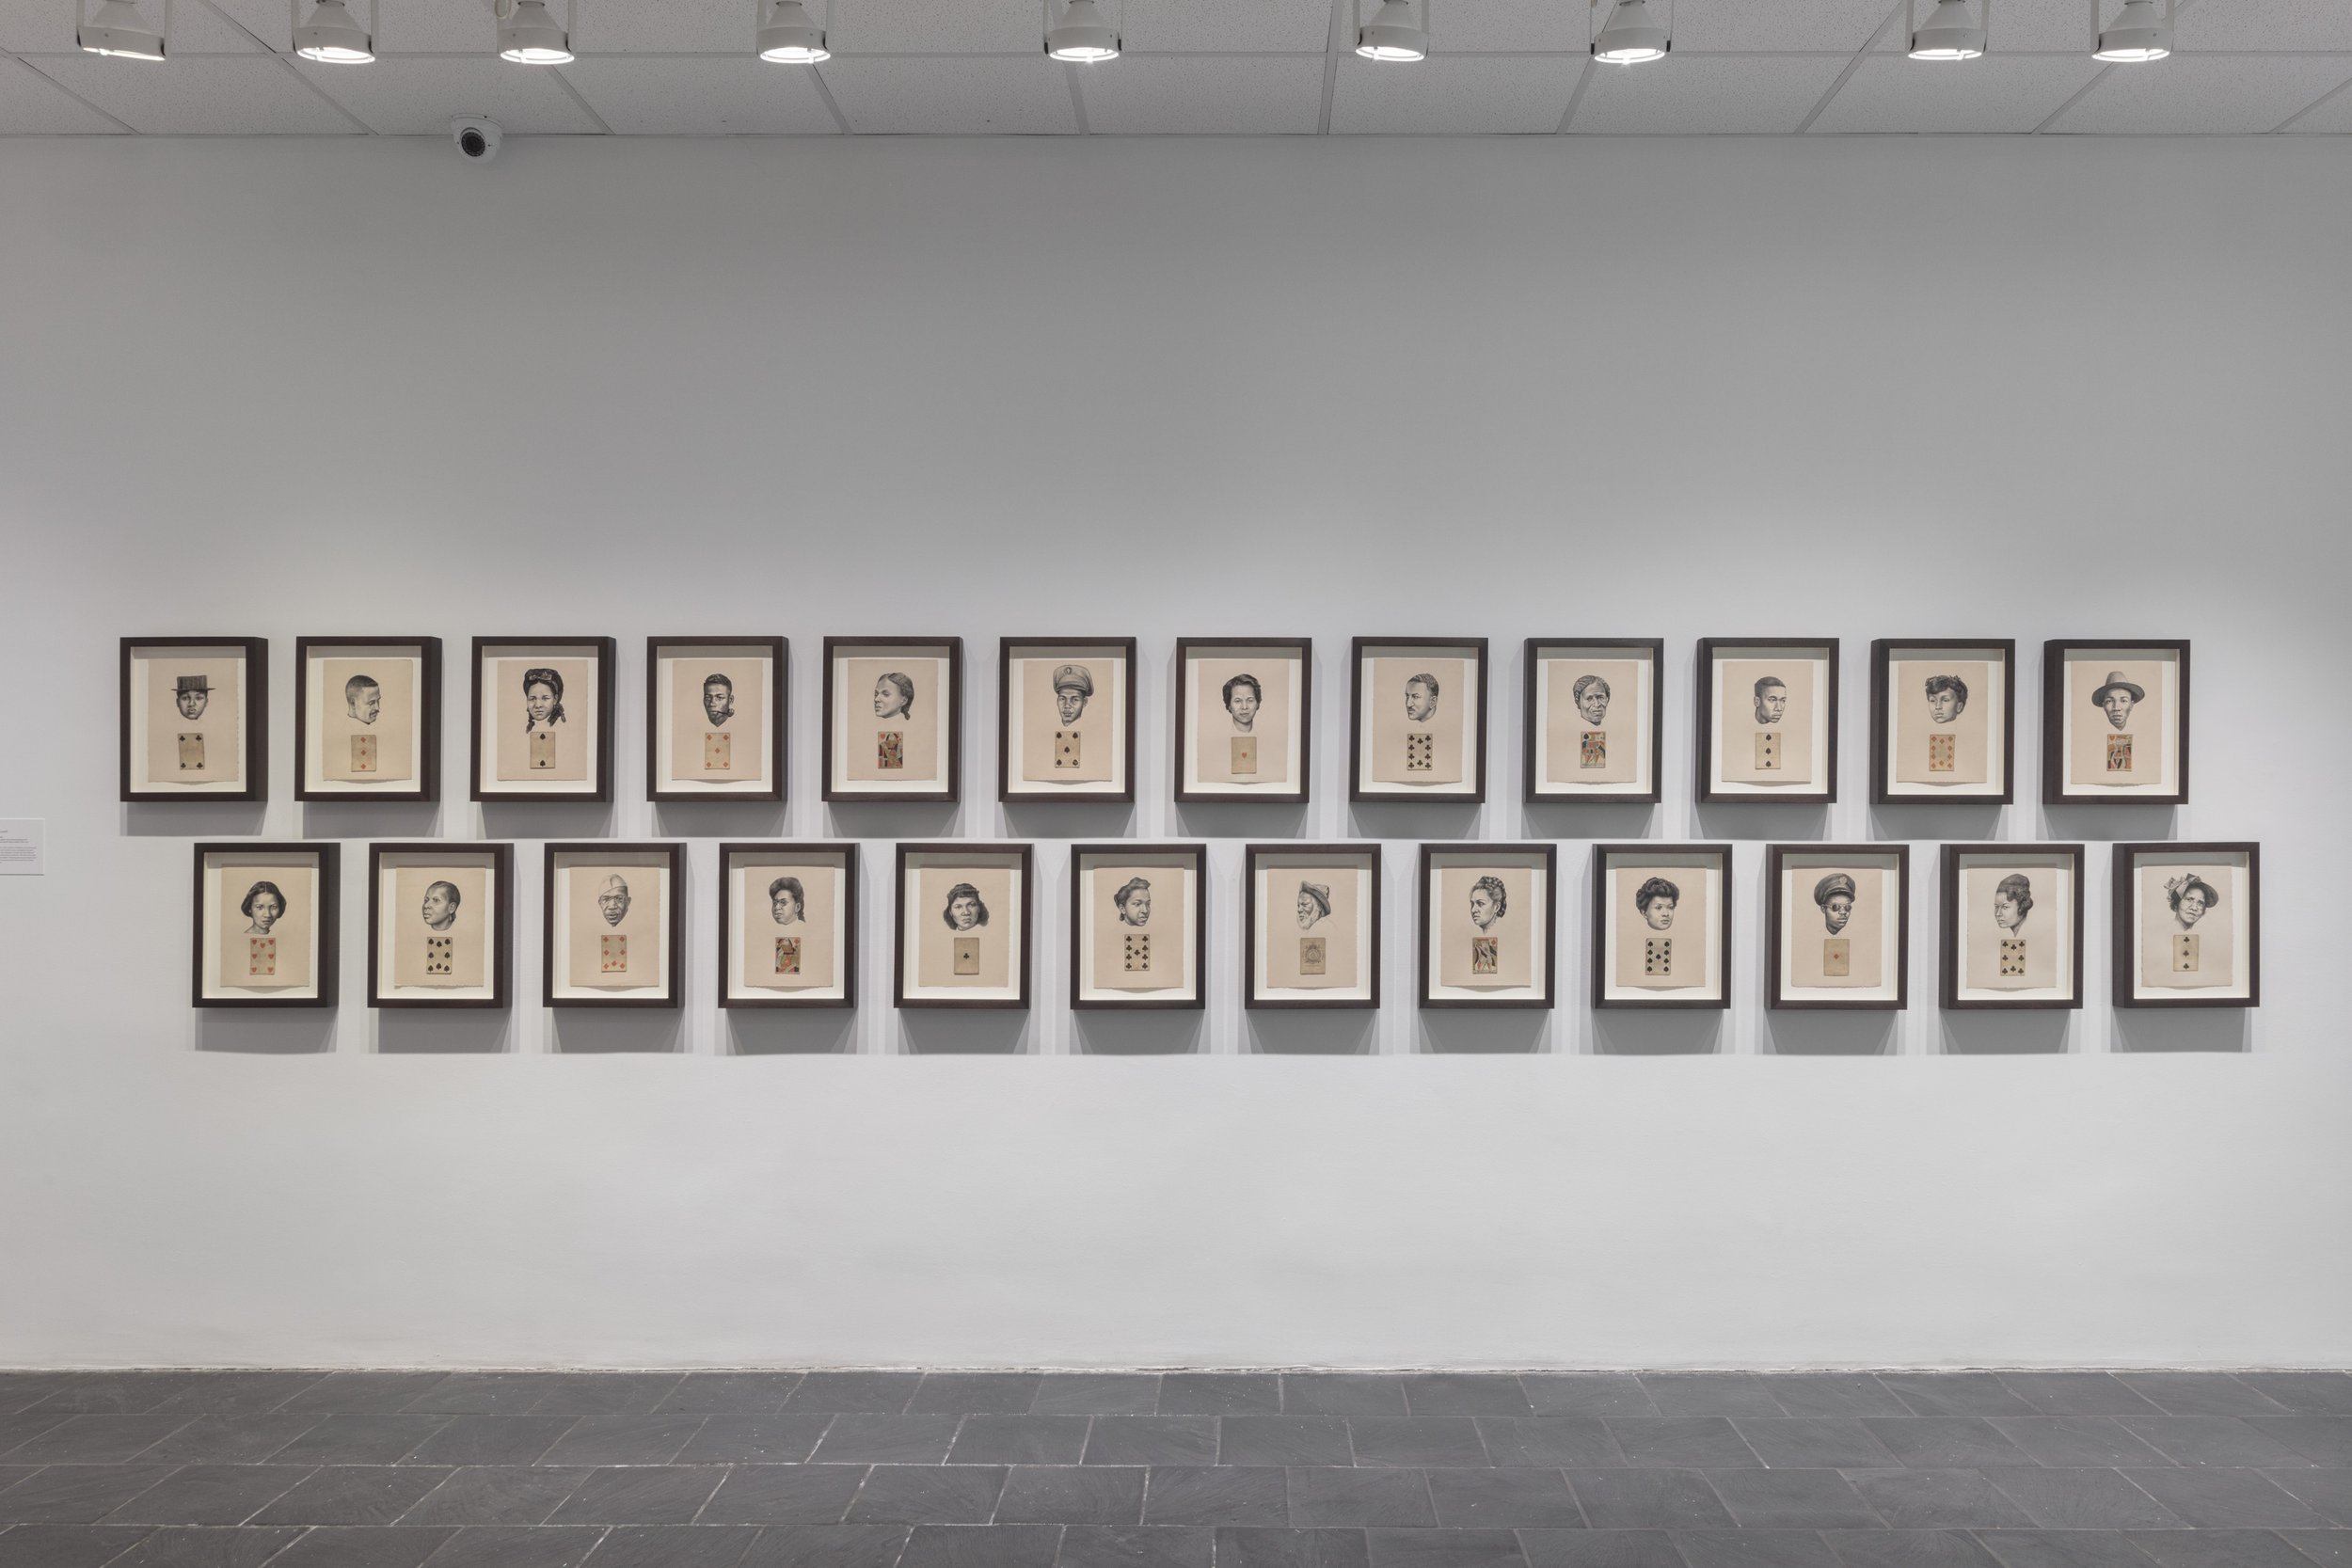  Installation view of  The Black Index  at Hunter College Art Galleries’ Leubsdorf Gallery, 2022. Photo: Stan Narten. Whitfield Lovell.  The Card Pieces , 2020. Series of charcoal pencil on paper with attached playing card, 12 x 9 inches each. Courte